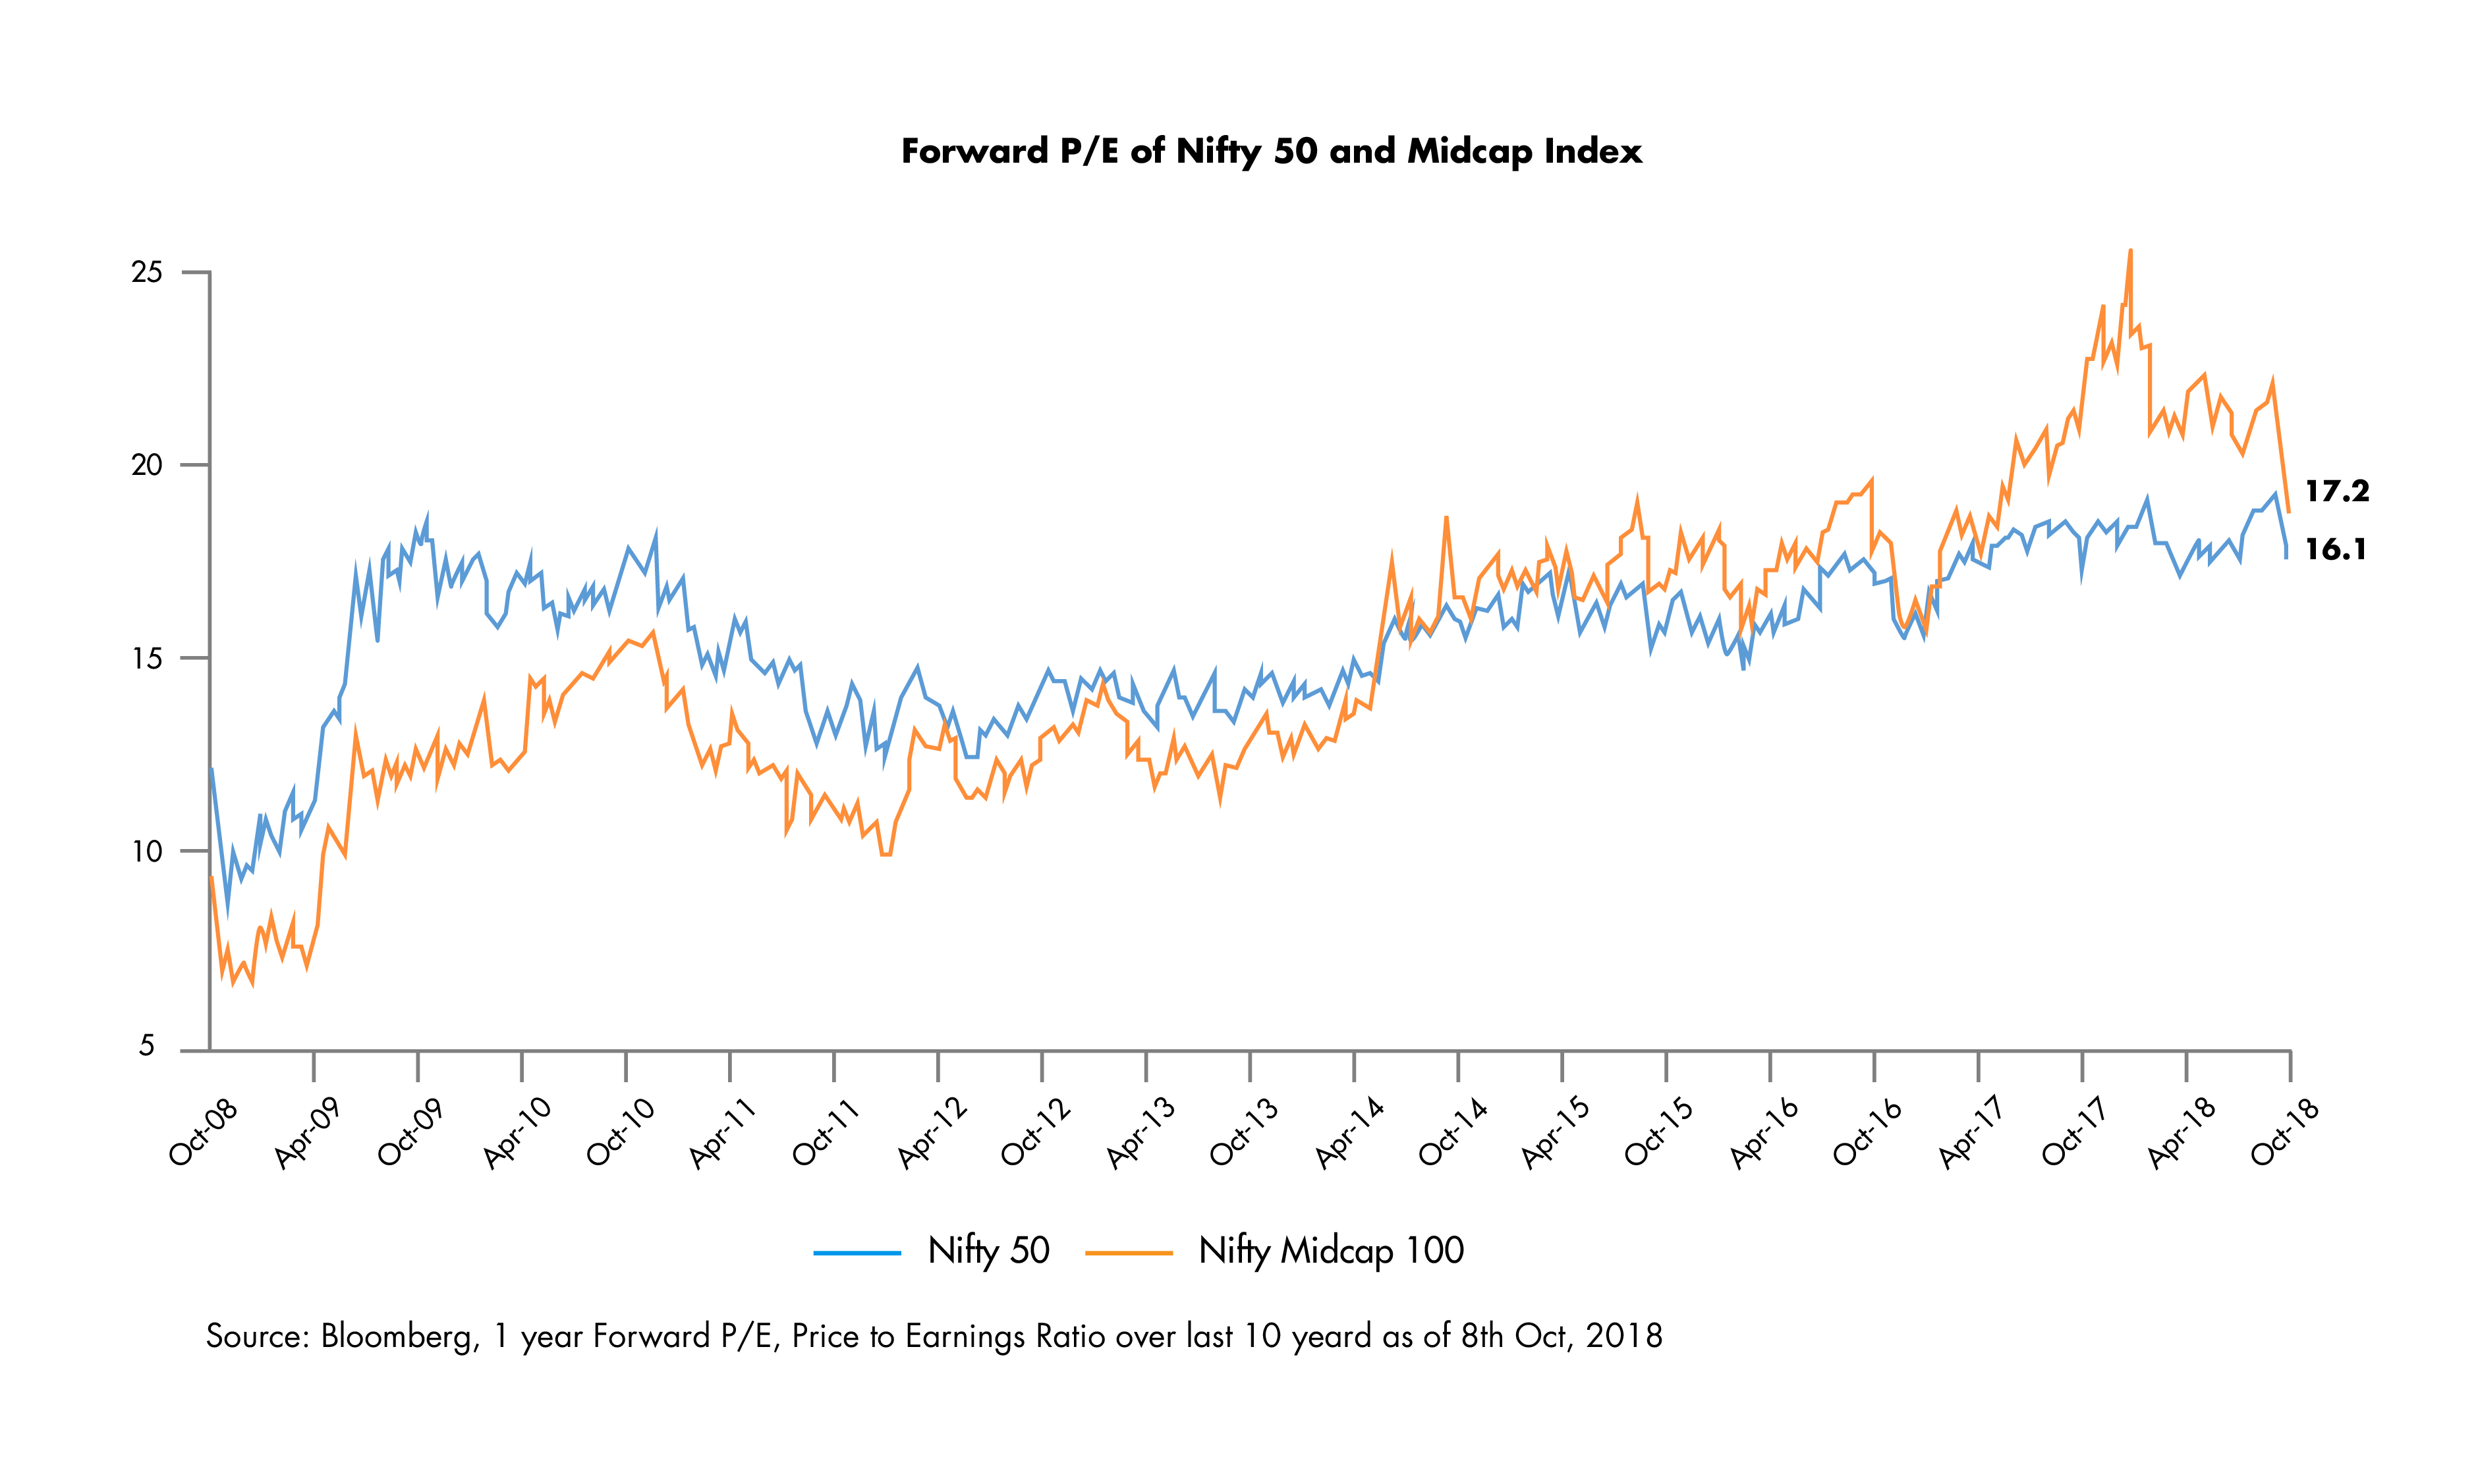 Forward P/E of Nifty 50 and Midcap Index